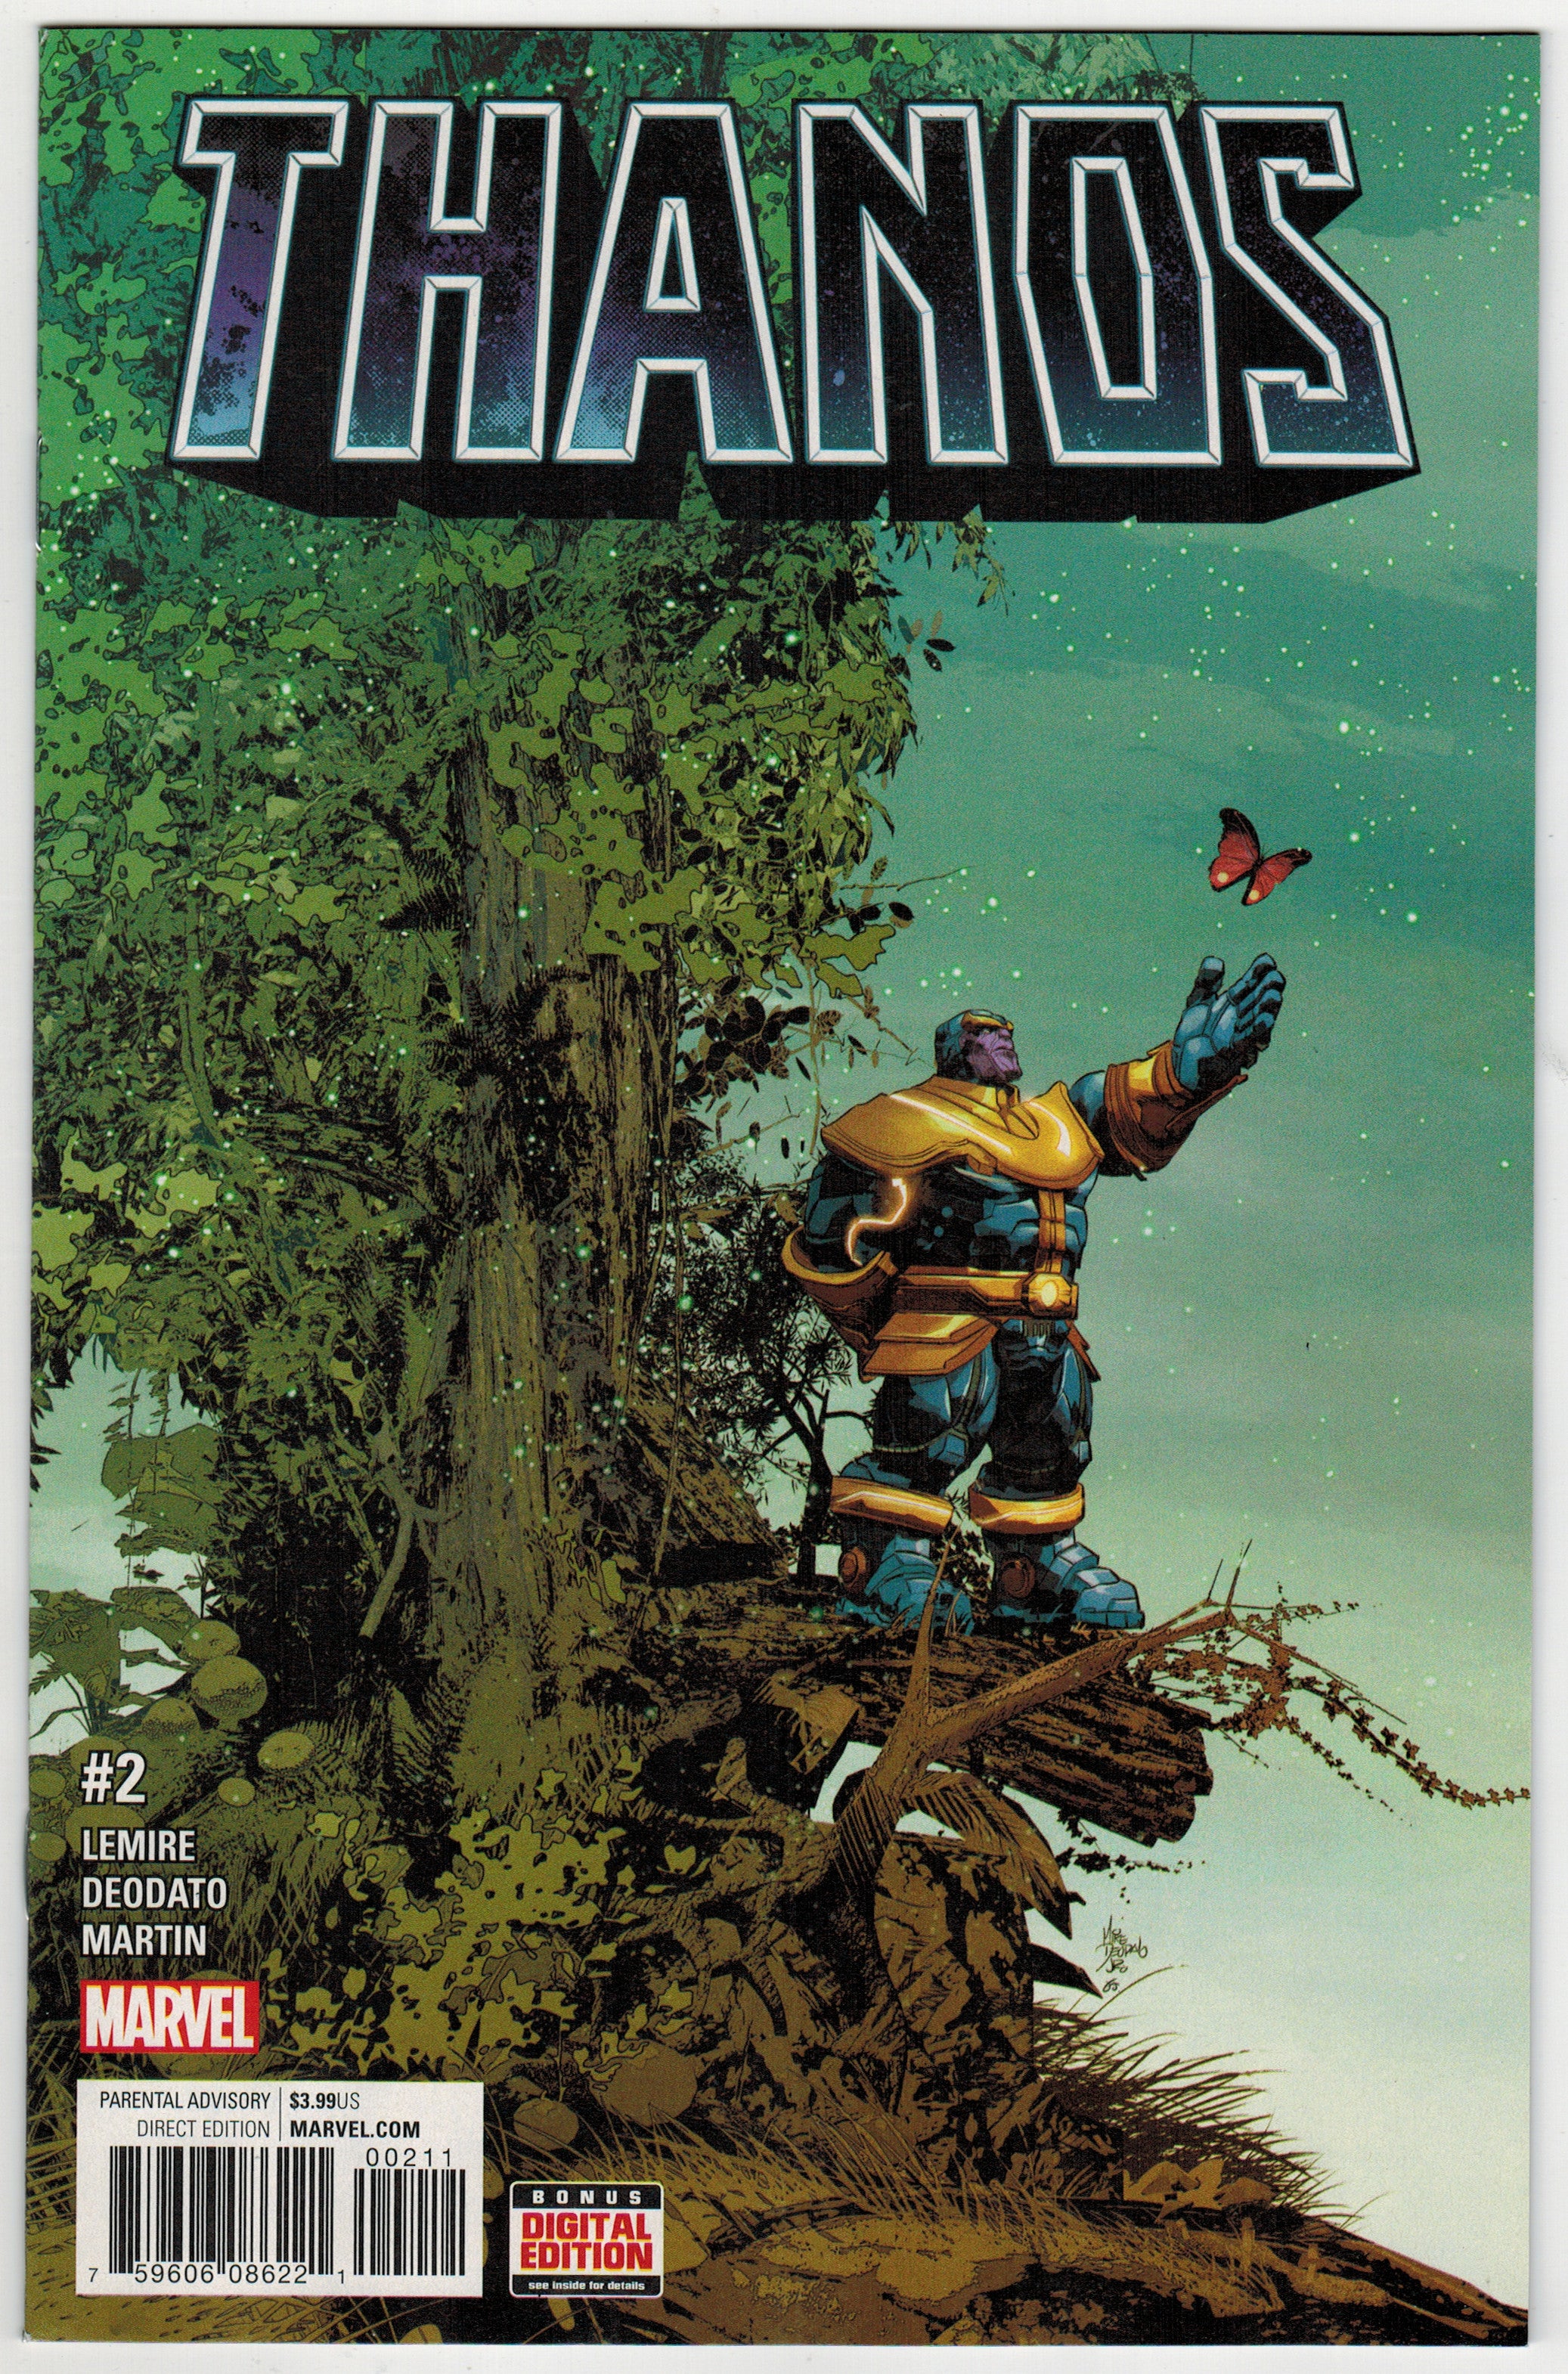 Photo of Thanos, Vol. 2 (2016) Issue 2A - Near Mint Comic sold by Stronghold Collectibles